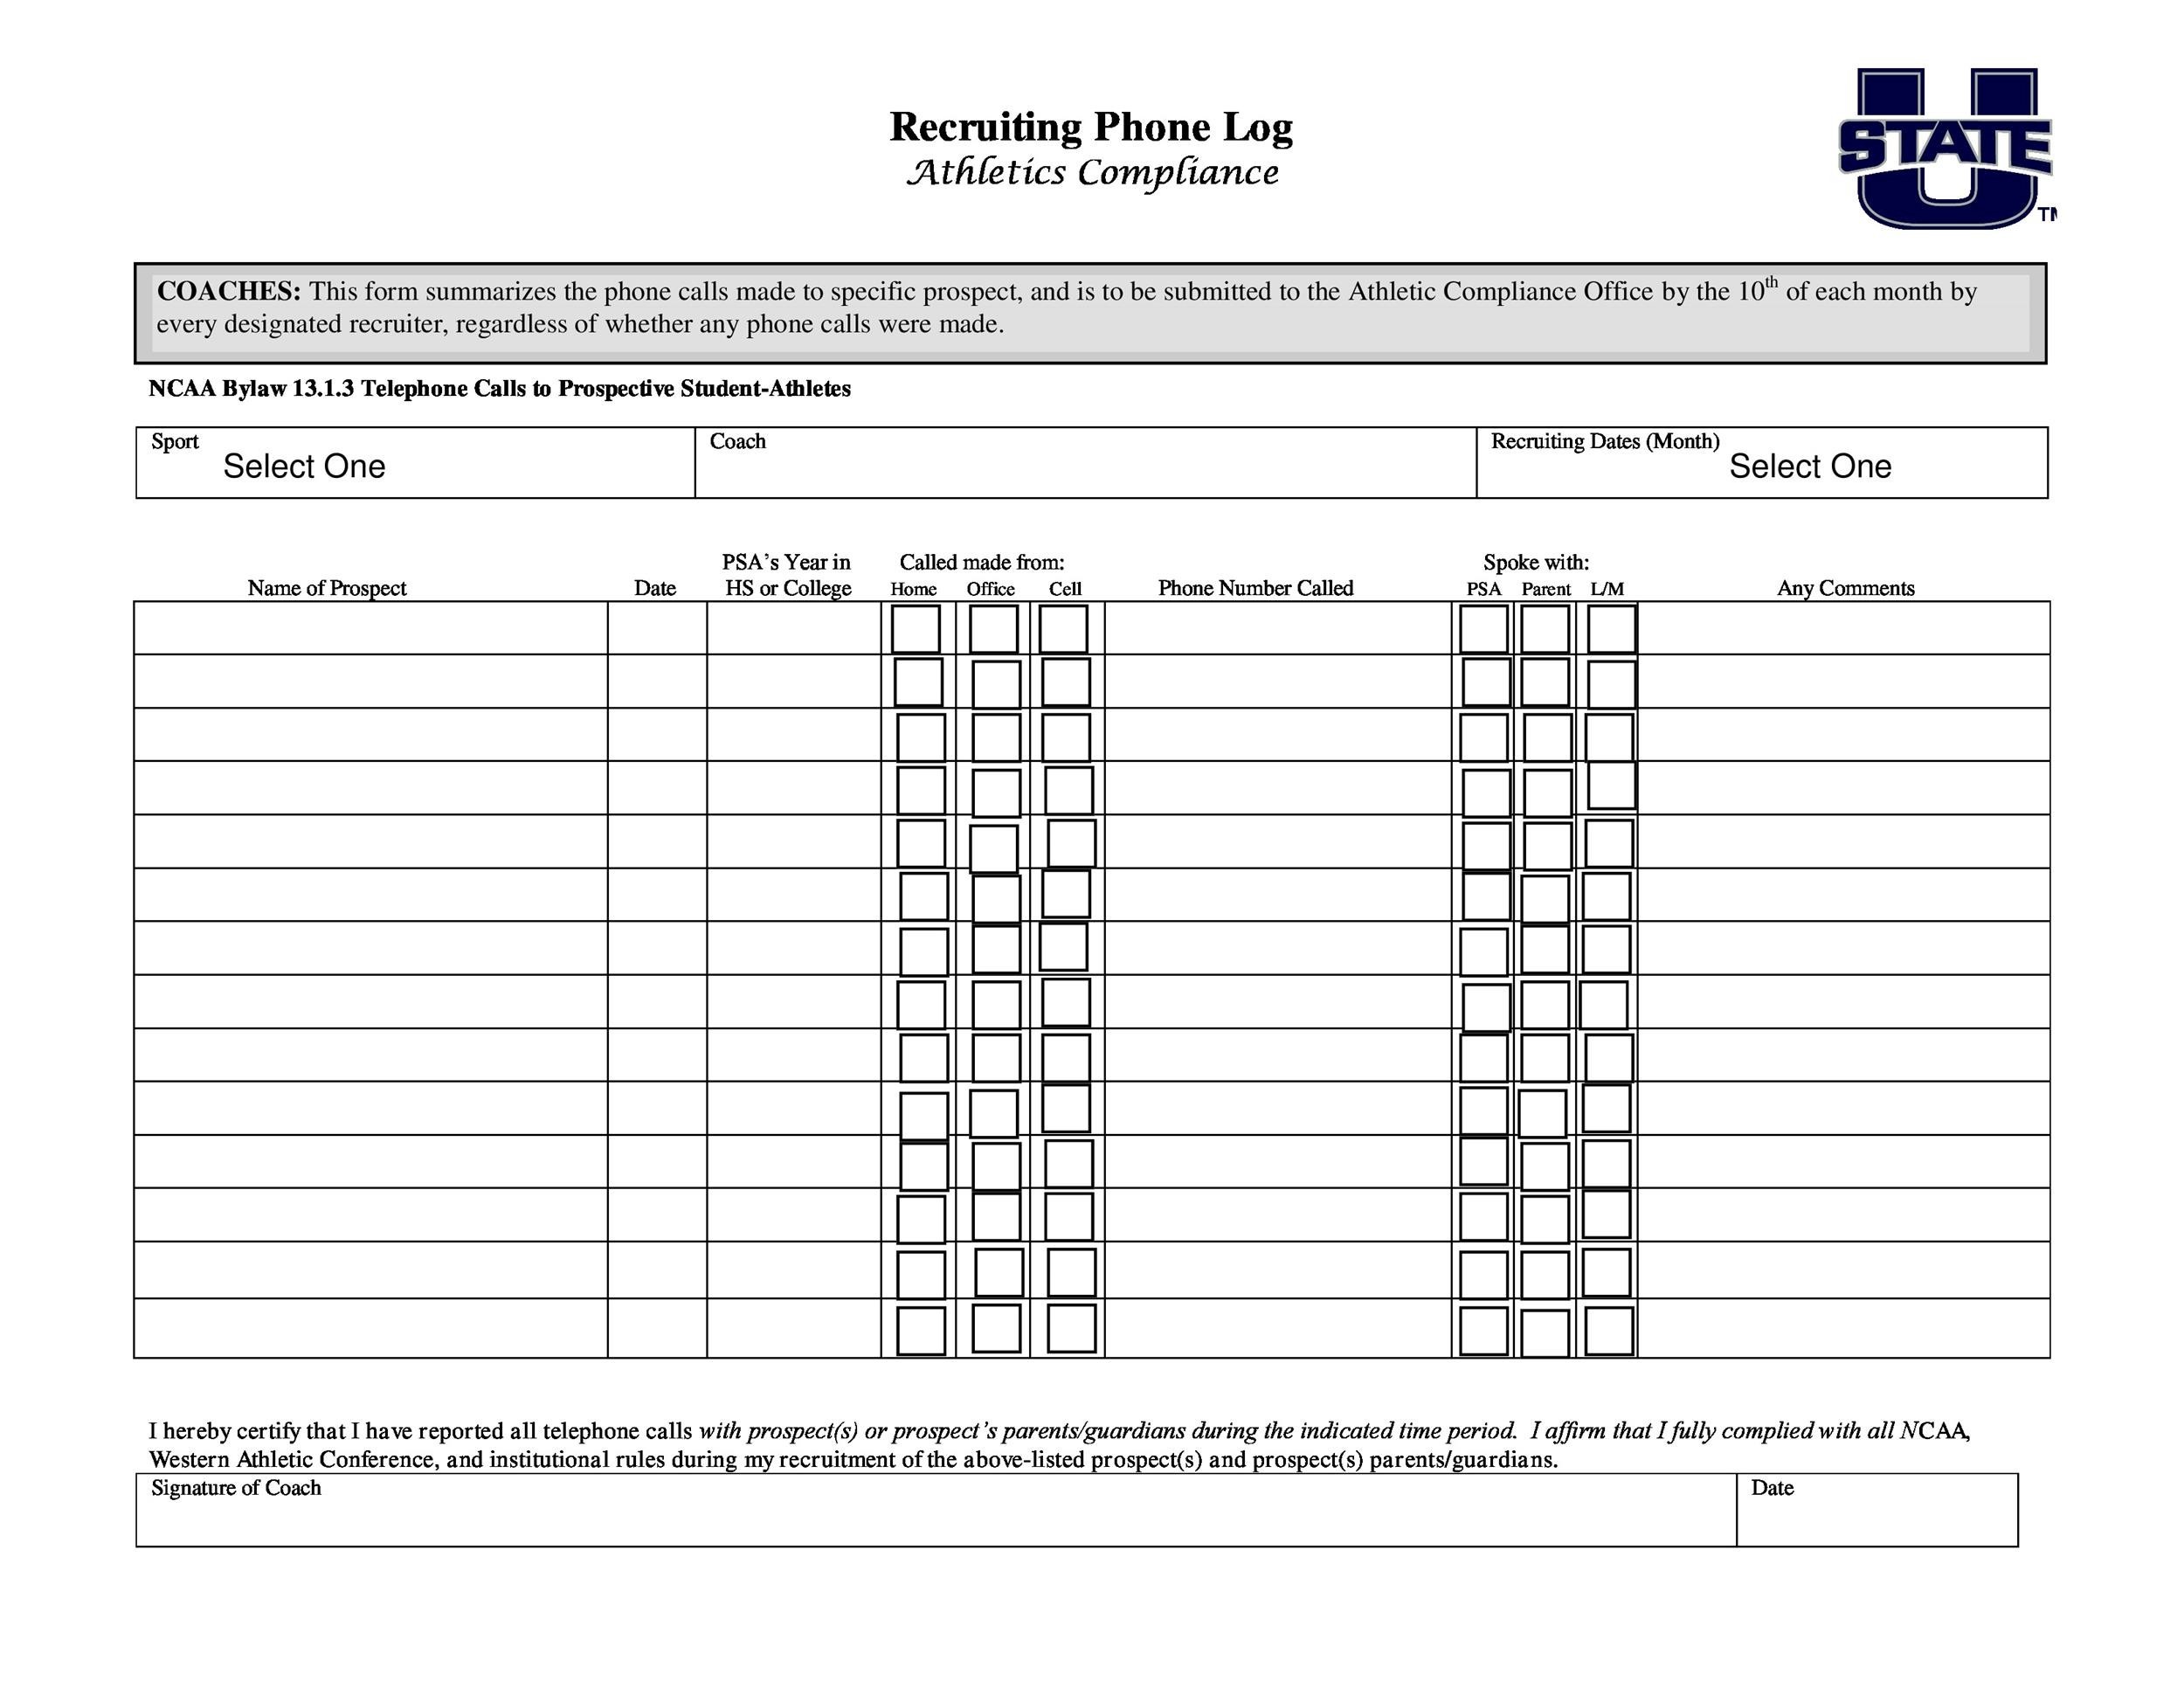 40-printable-call-log-templates-in-microsoft-word-and-excel